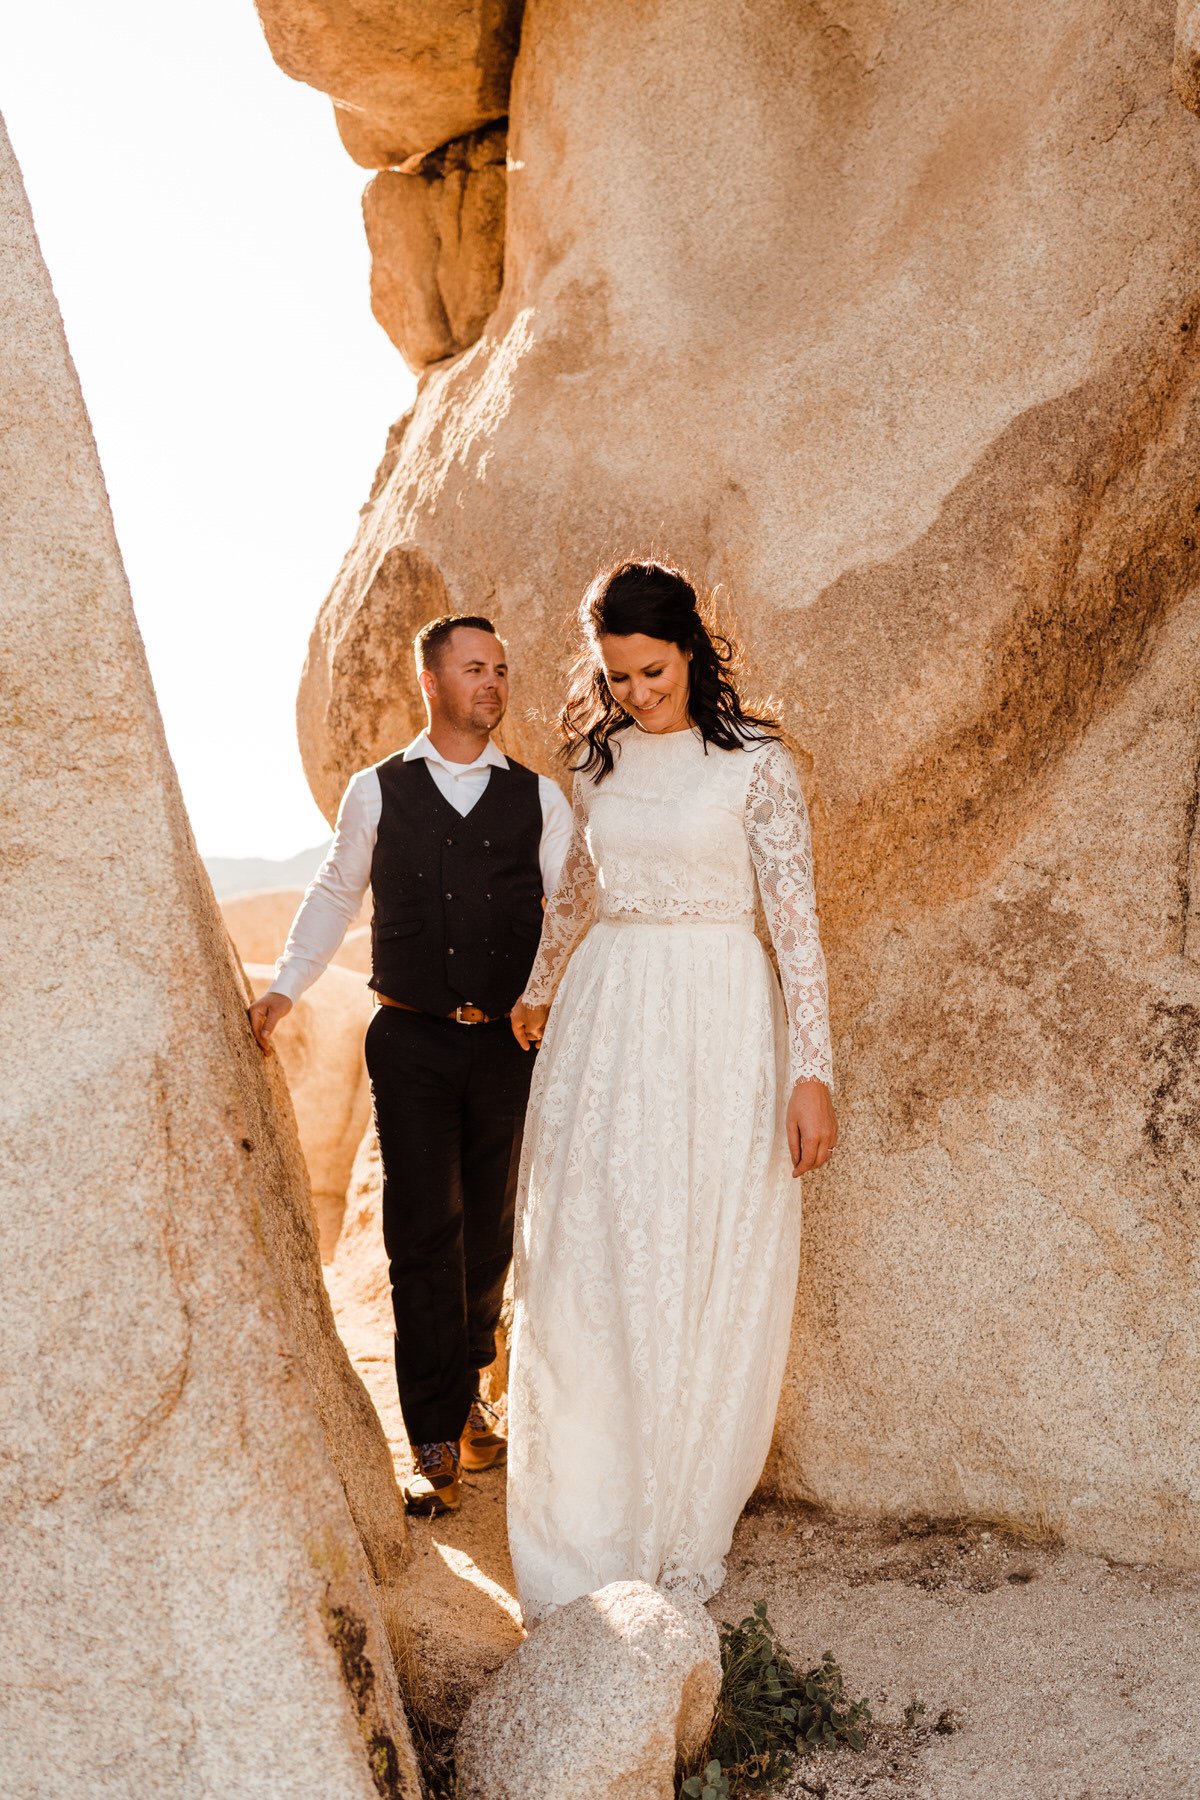 Bride-in-Two-Piece-Wedding-Dress-with-Lace-Sleeves-Leads-Groom-in-Suit-and-Boots.jpg